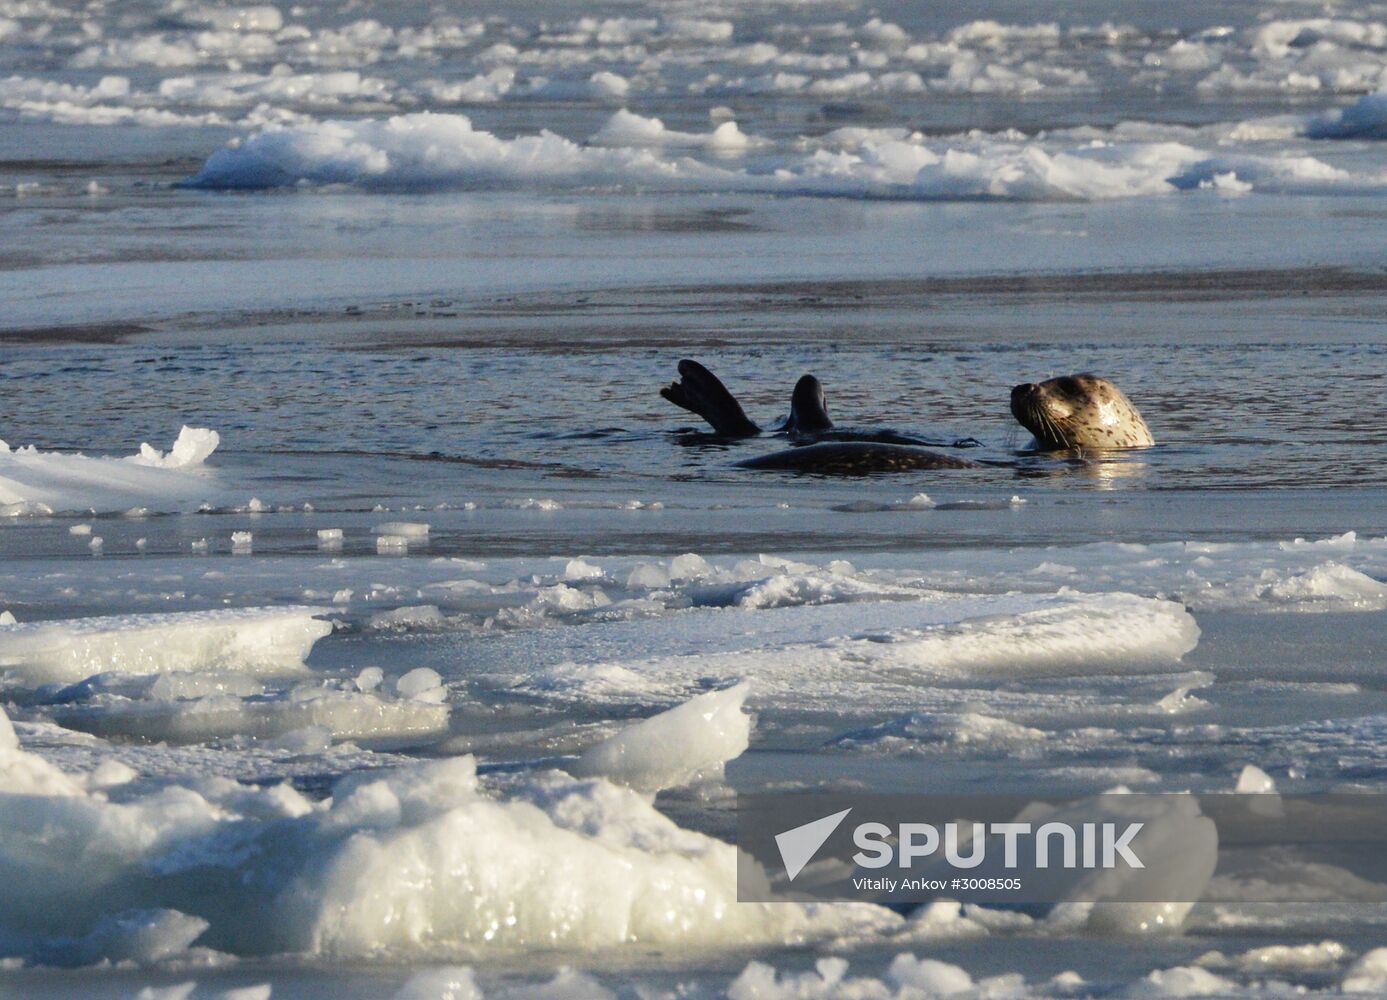 Tough ice situation in Vladivostok waters